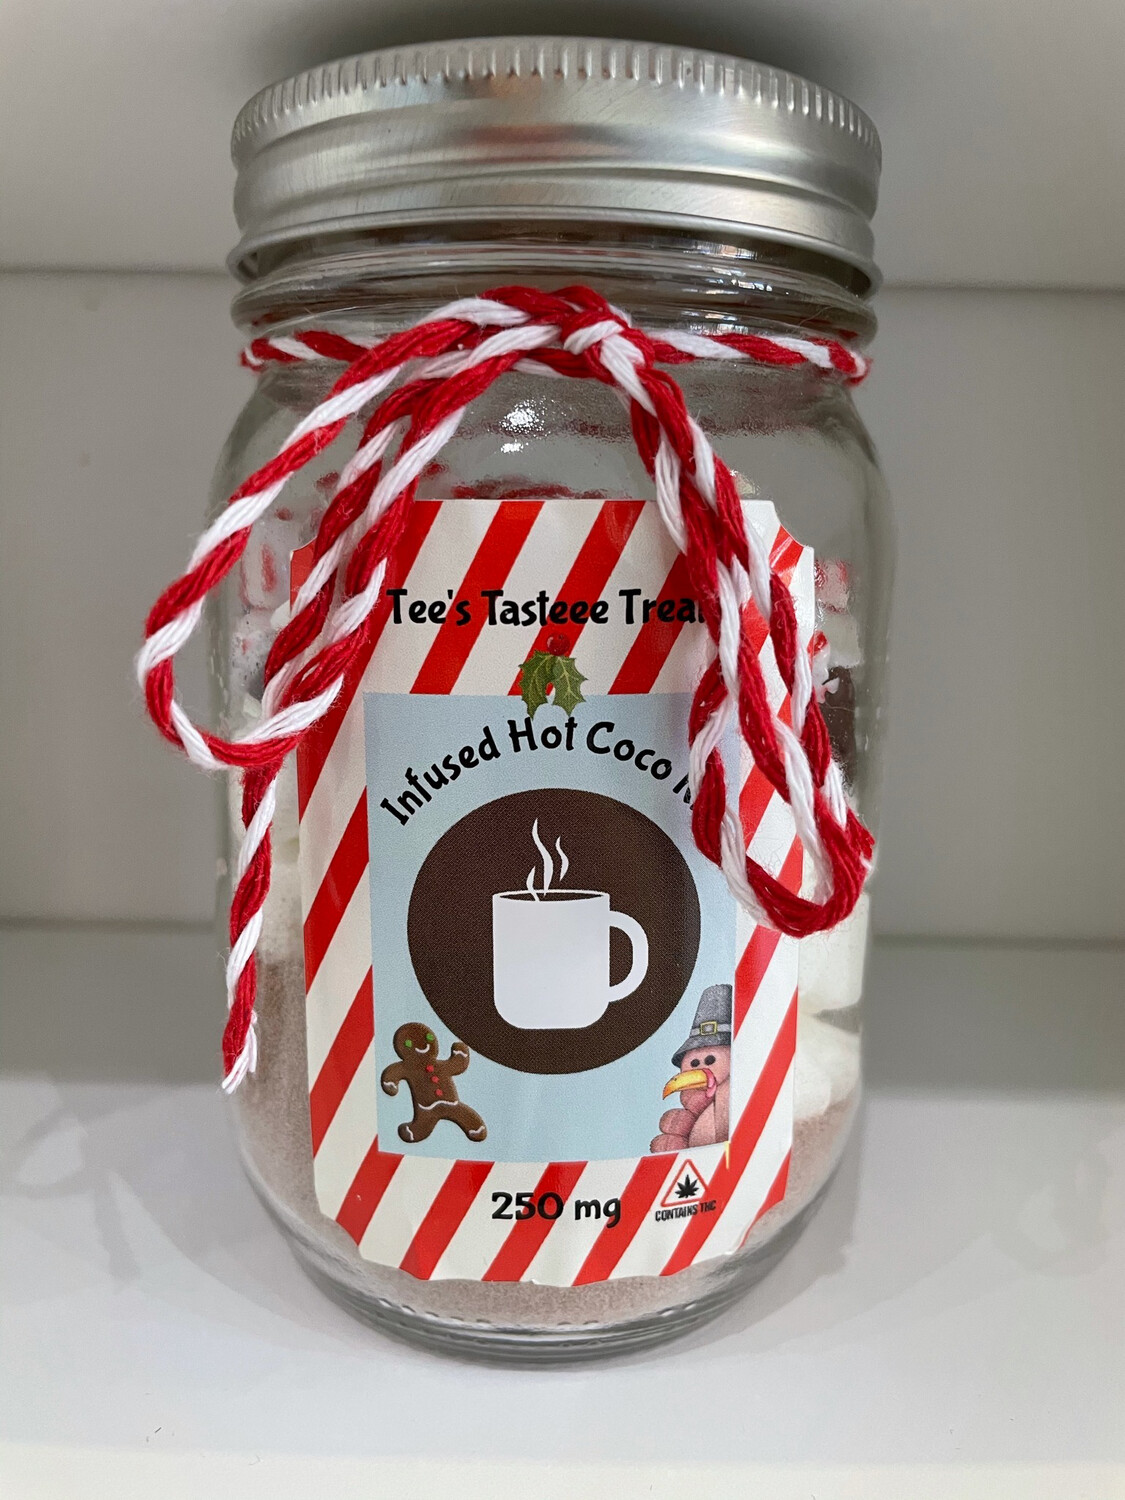 Legal Coupon (Infused Hot Coco Kit) Optional Gift